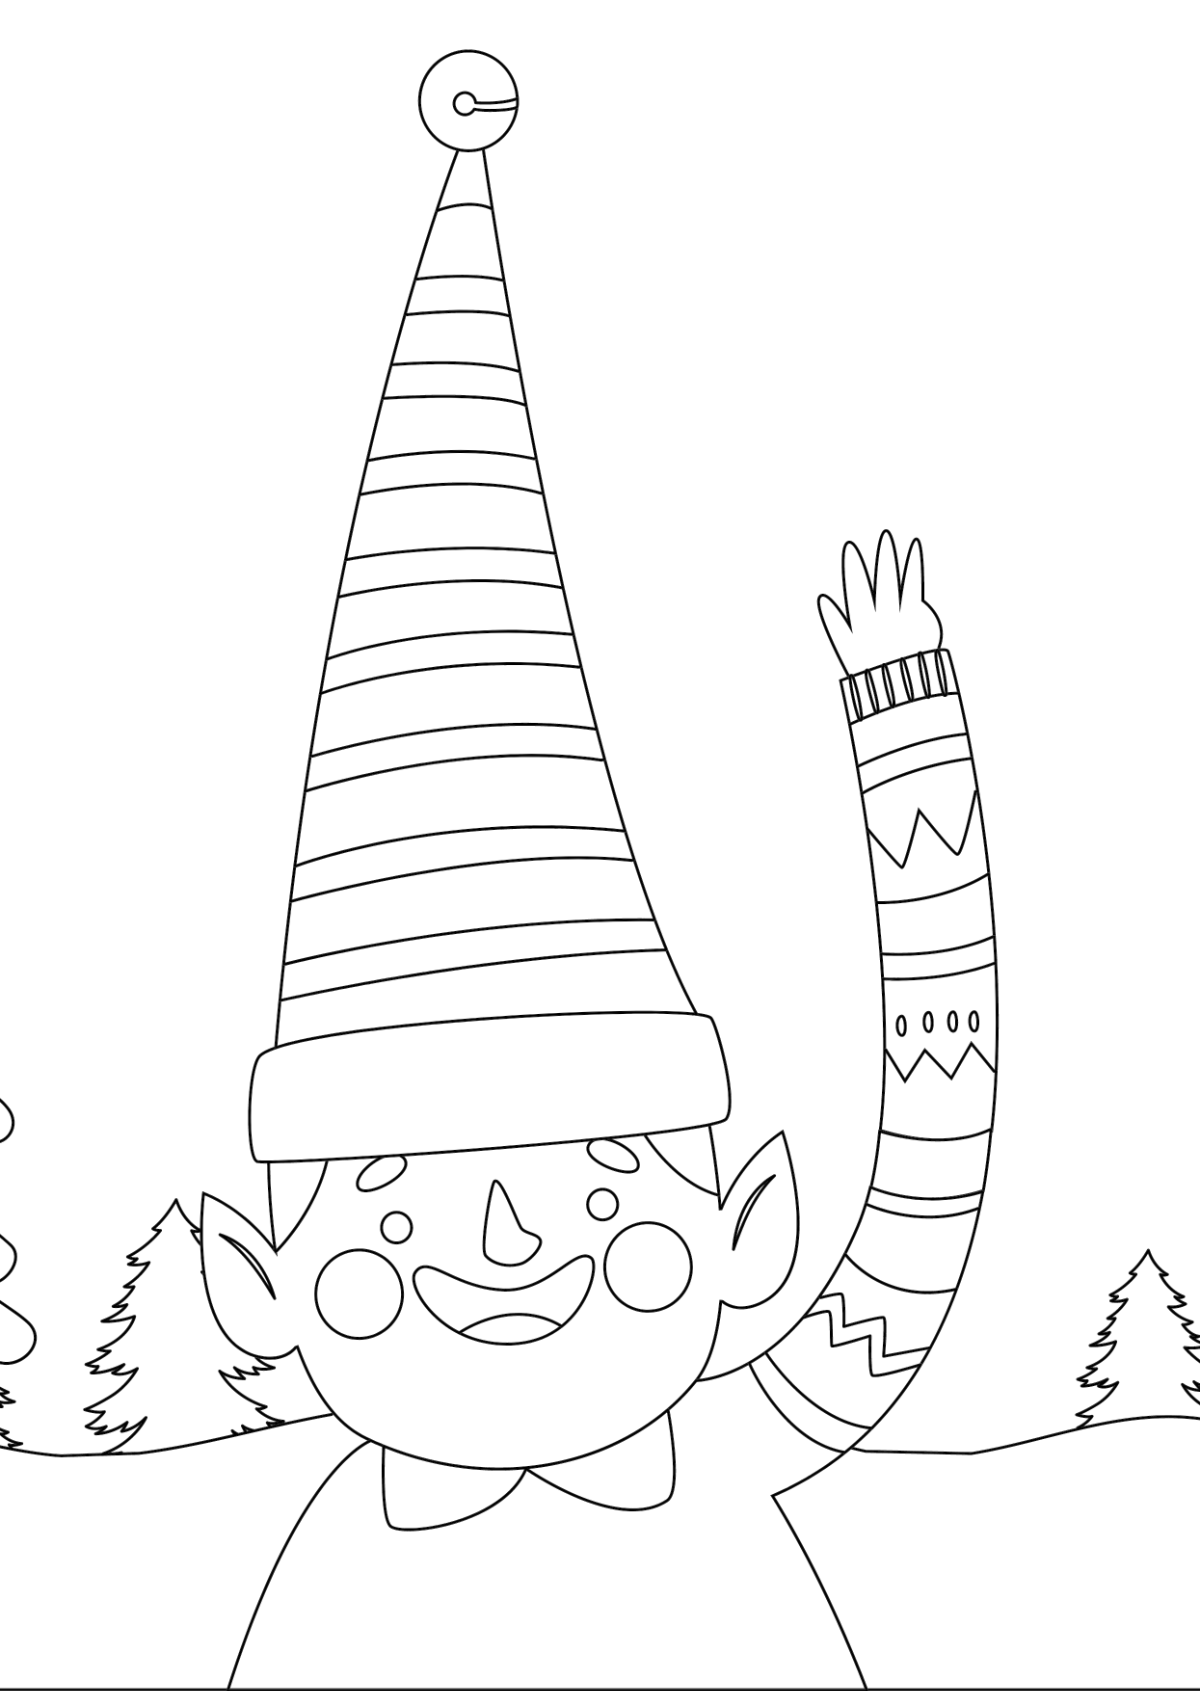 Free Elf Christmas Drawing Template